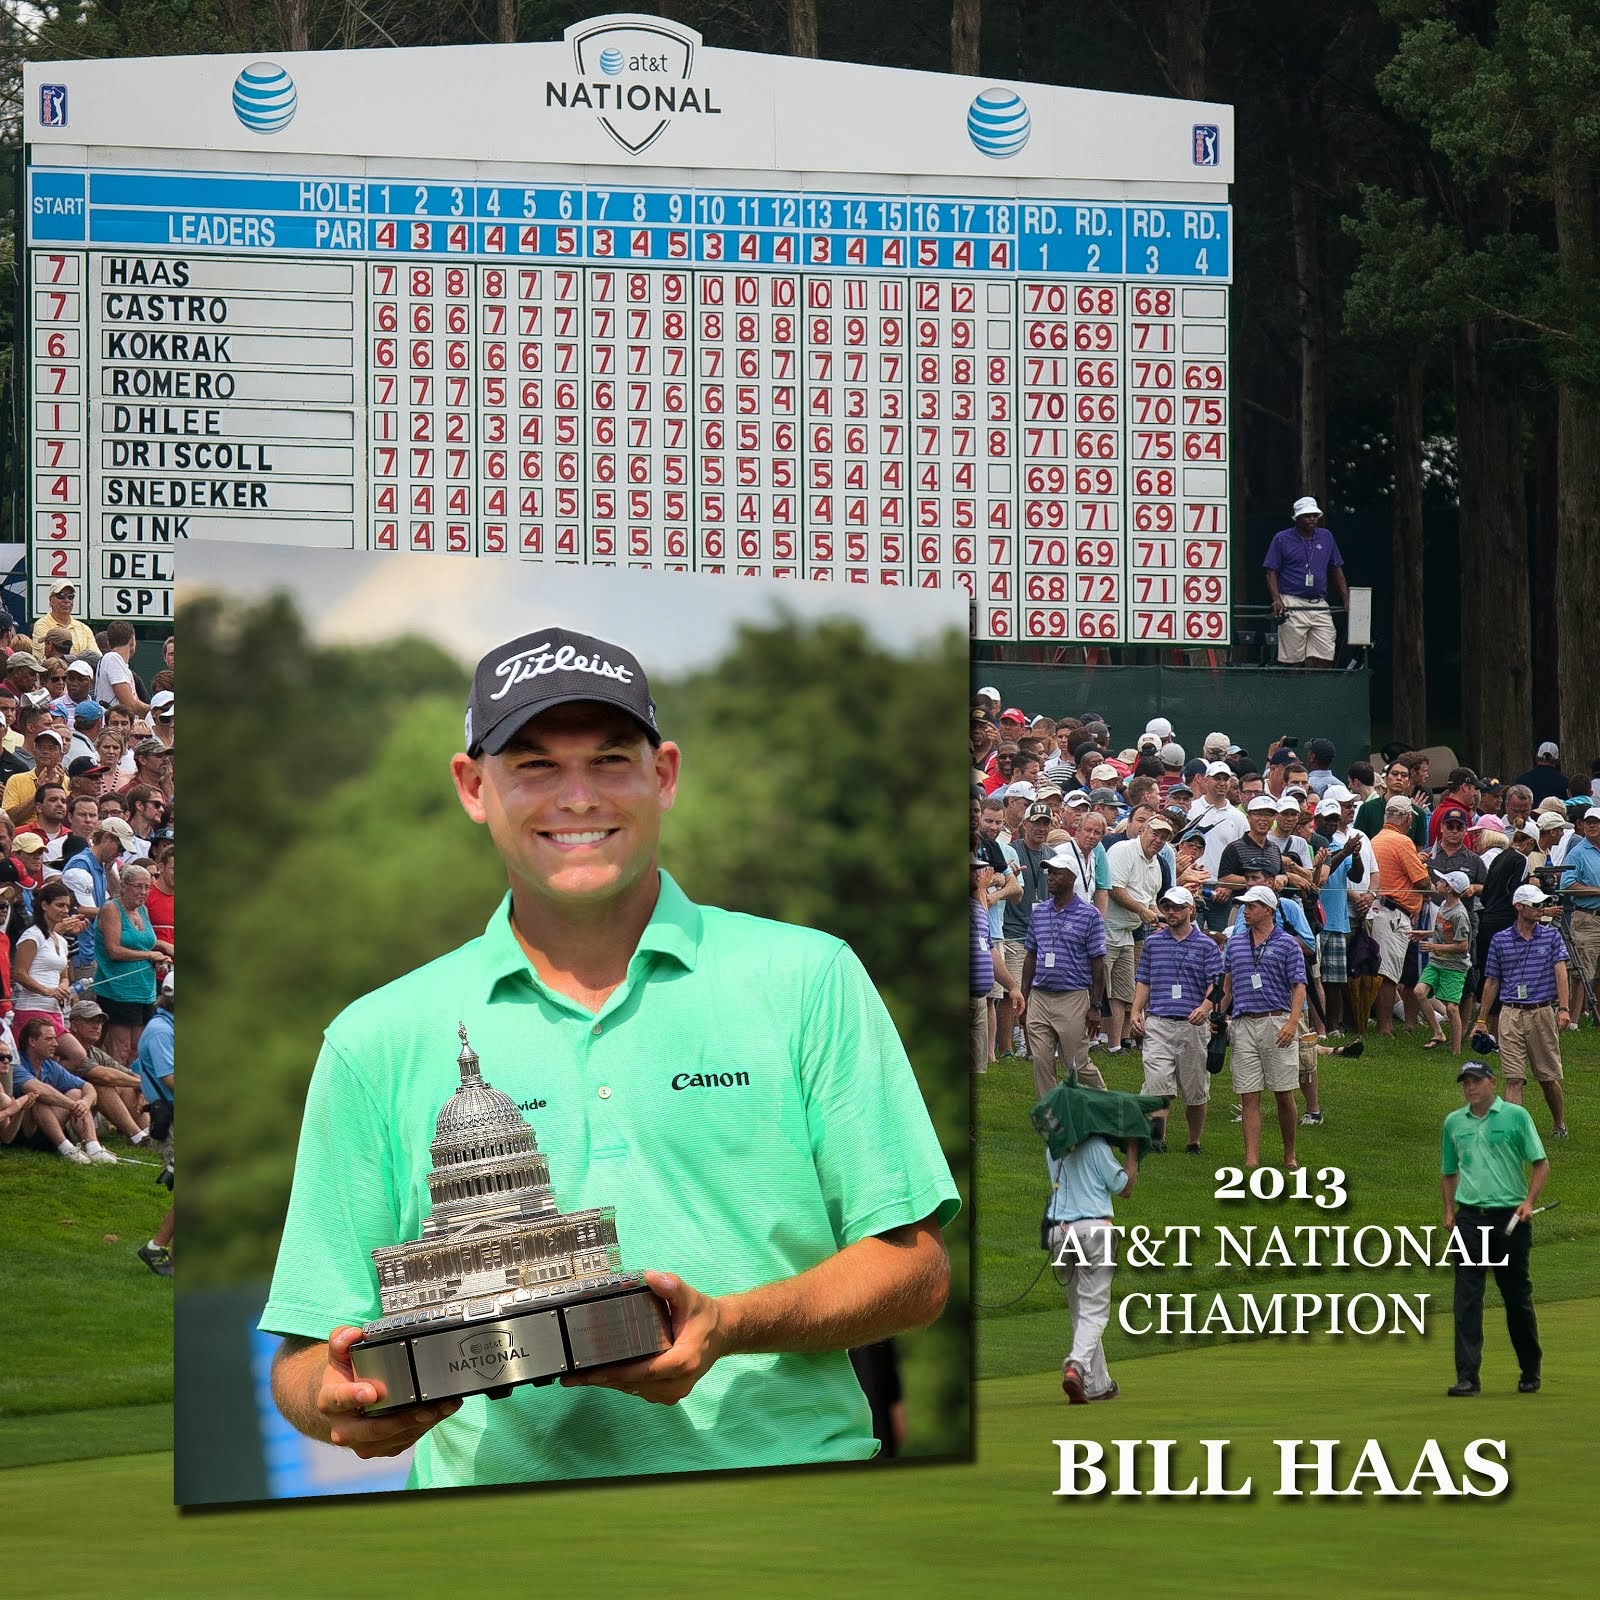 Bill Haas taking the walk down 18 to get the trophy!